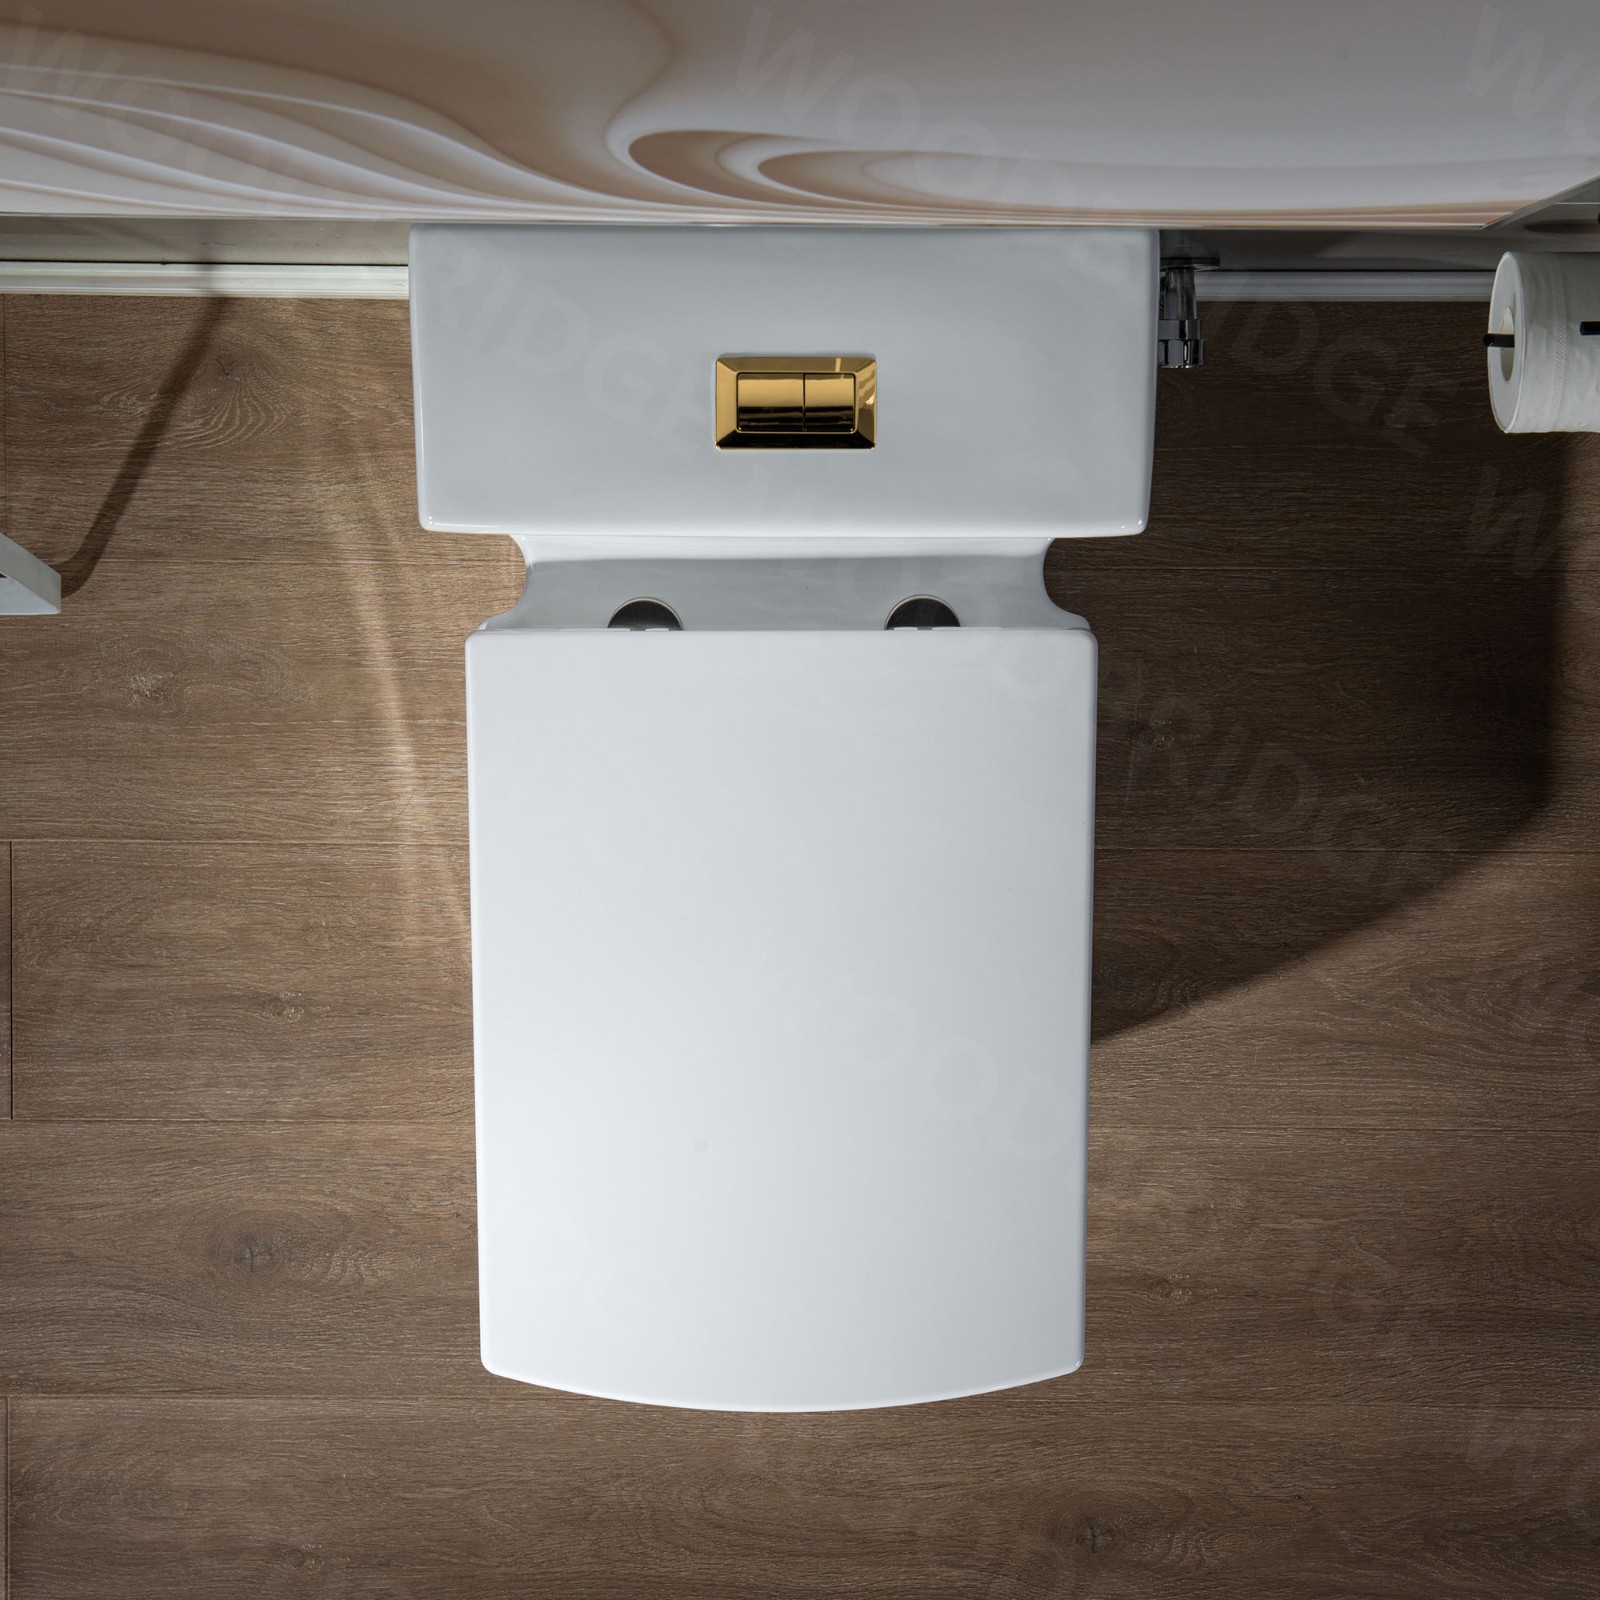  WOODBRIDGE Modern Square Design One Piece Dual Flush 1.28 GP Toilet,Chair Height with Soft Closing Seat, Brushed Gold Button B0920-BG, White_5579